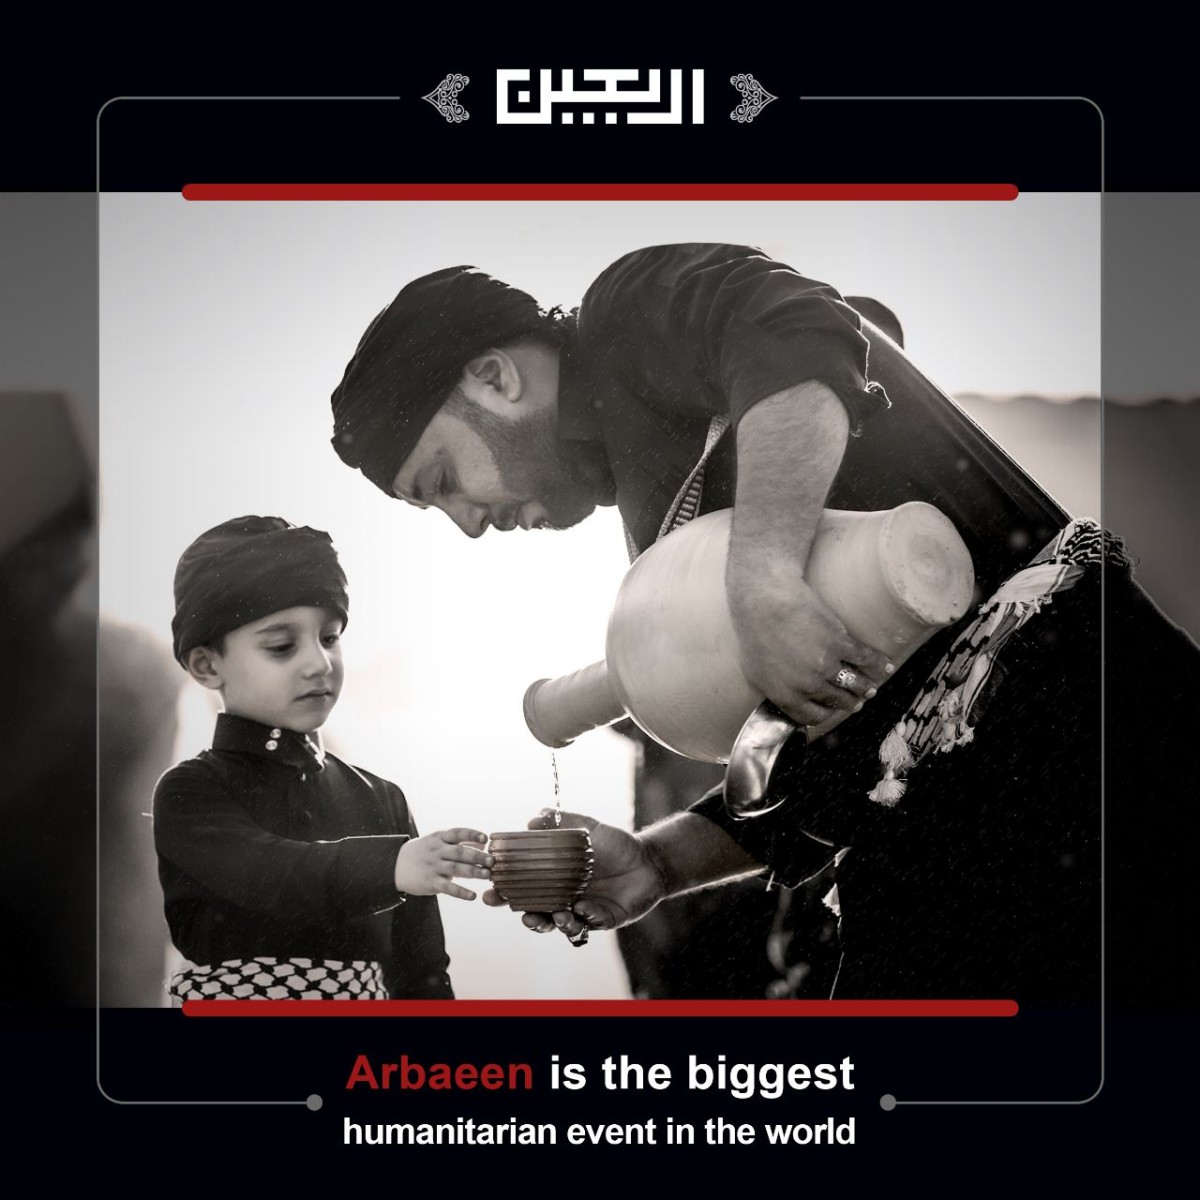 Arbaeen is the biggest humanitarian event in the world